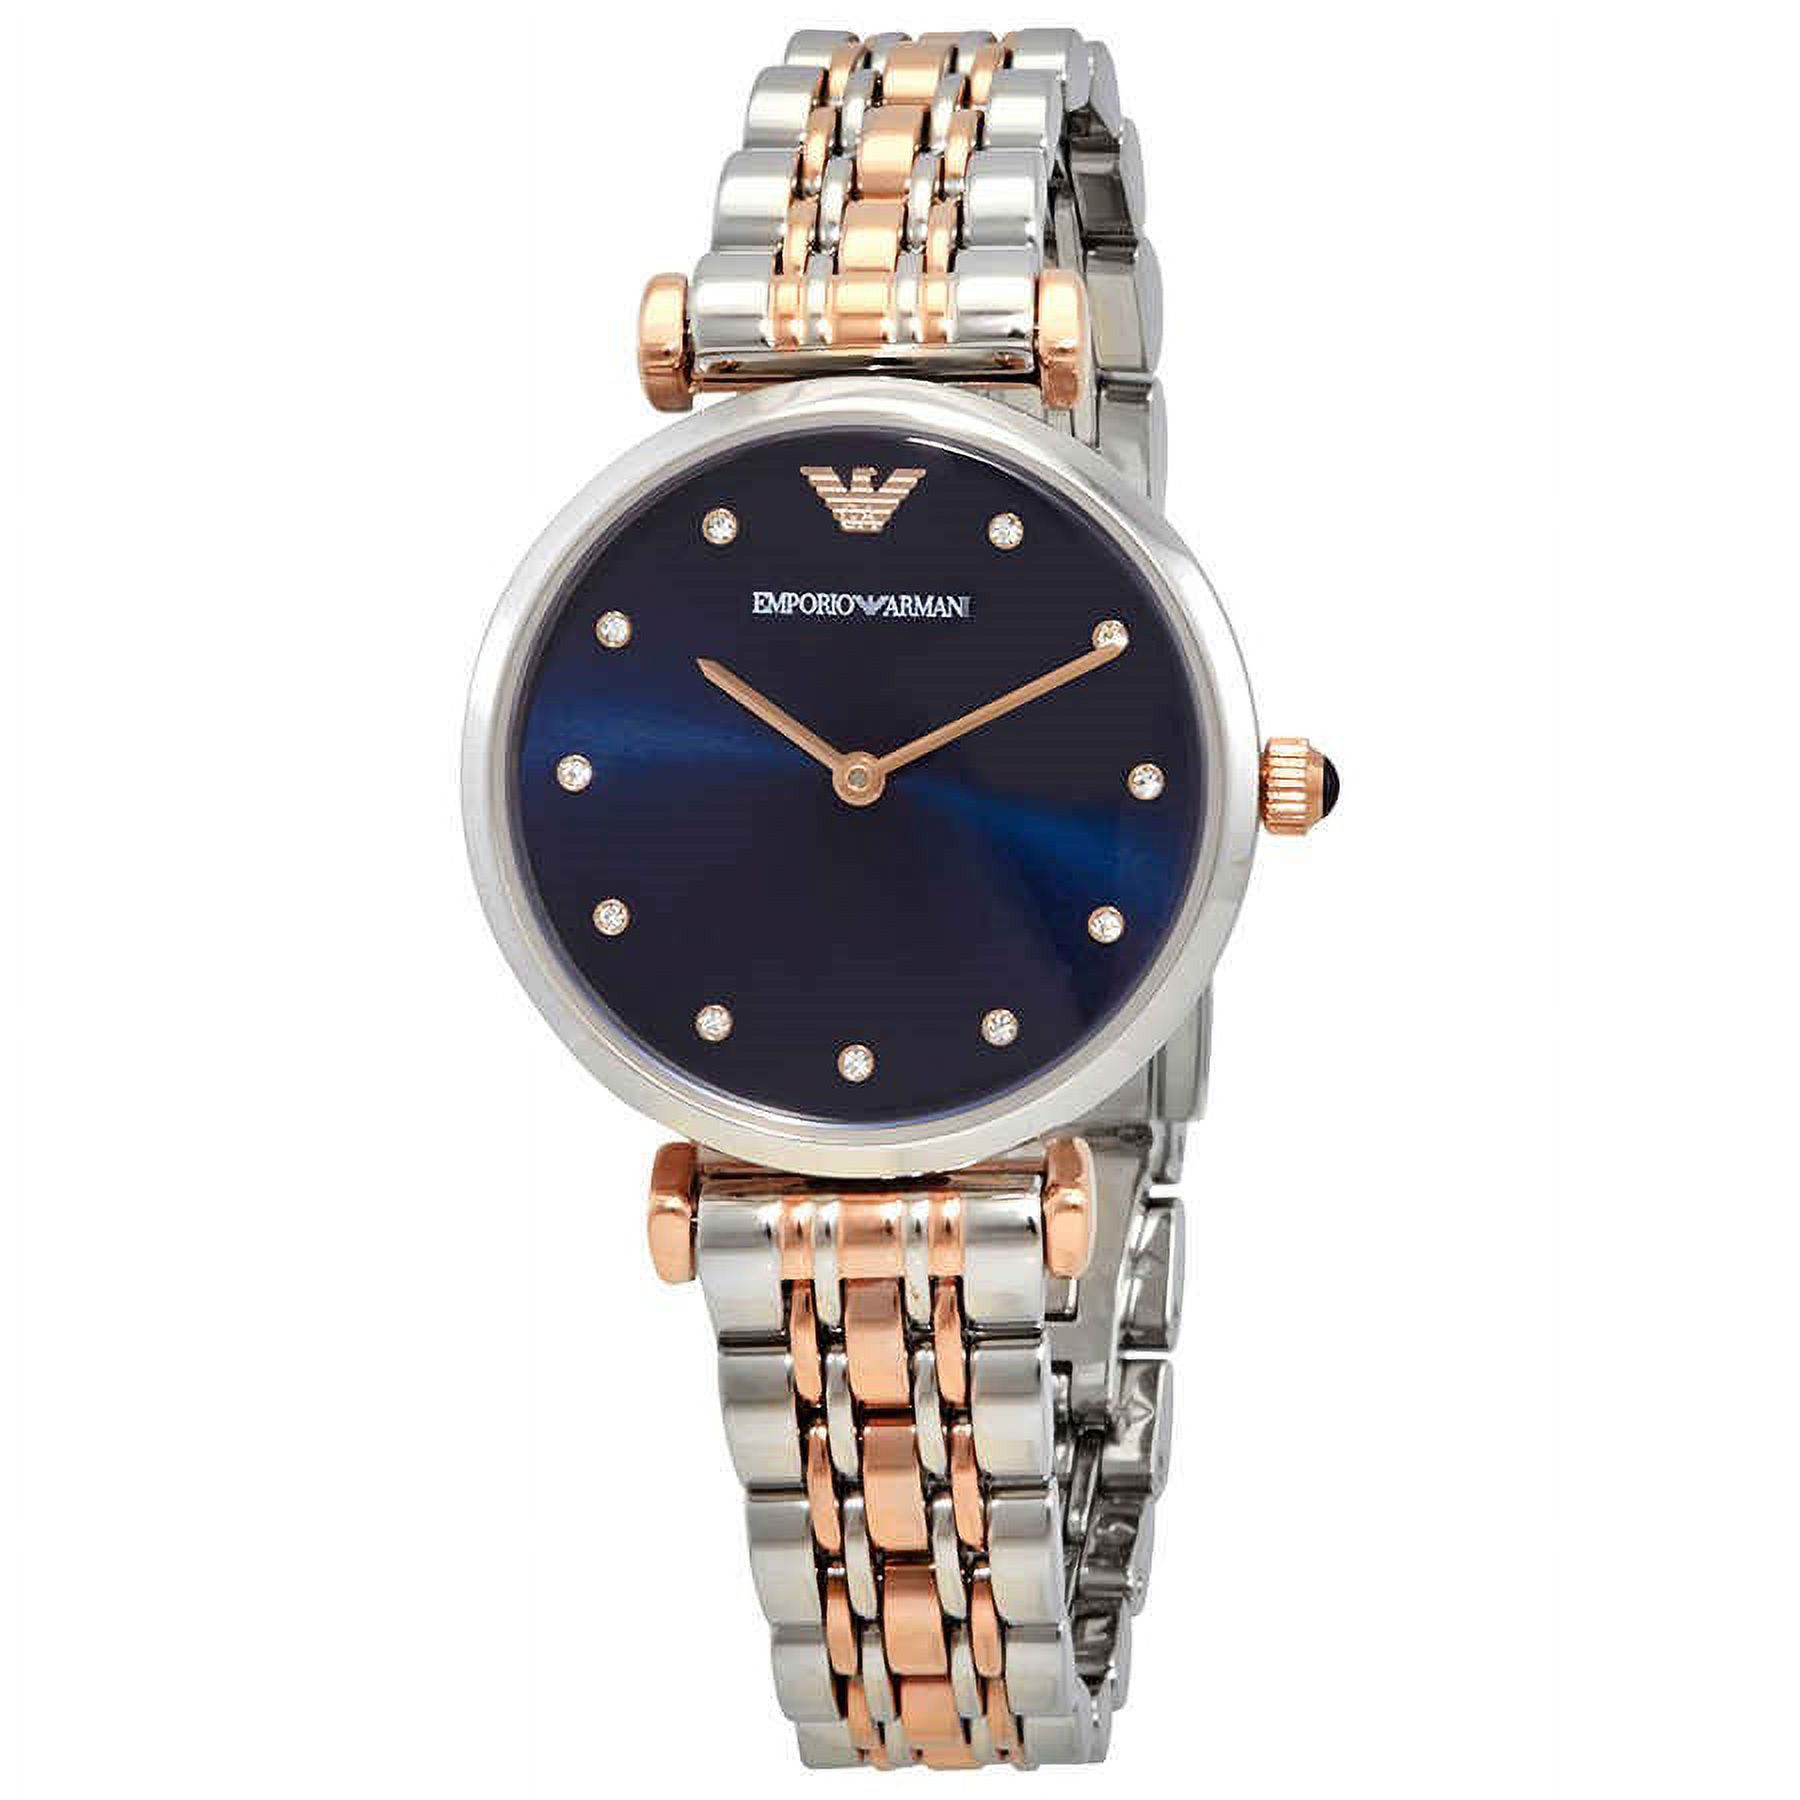 Emporio Armani Women's Two-Tone Stainless Steel Dress Watch AR11092 - image 3 of 5